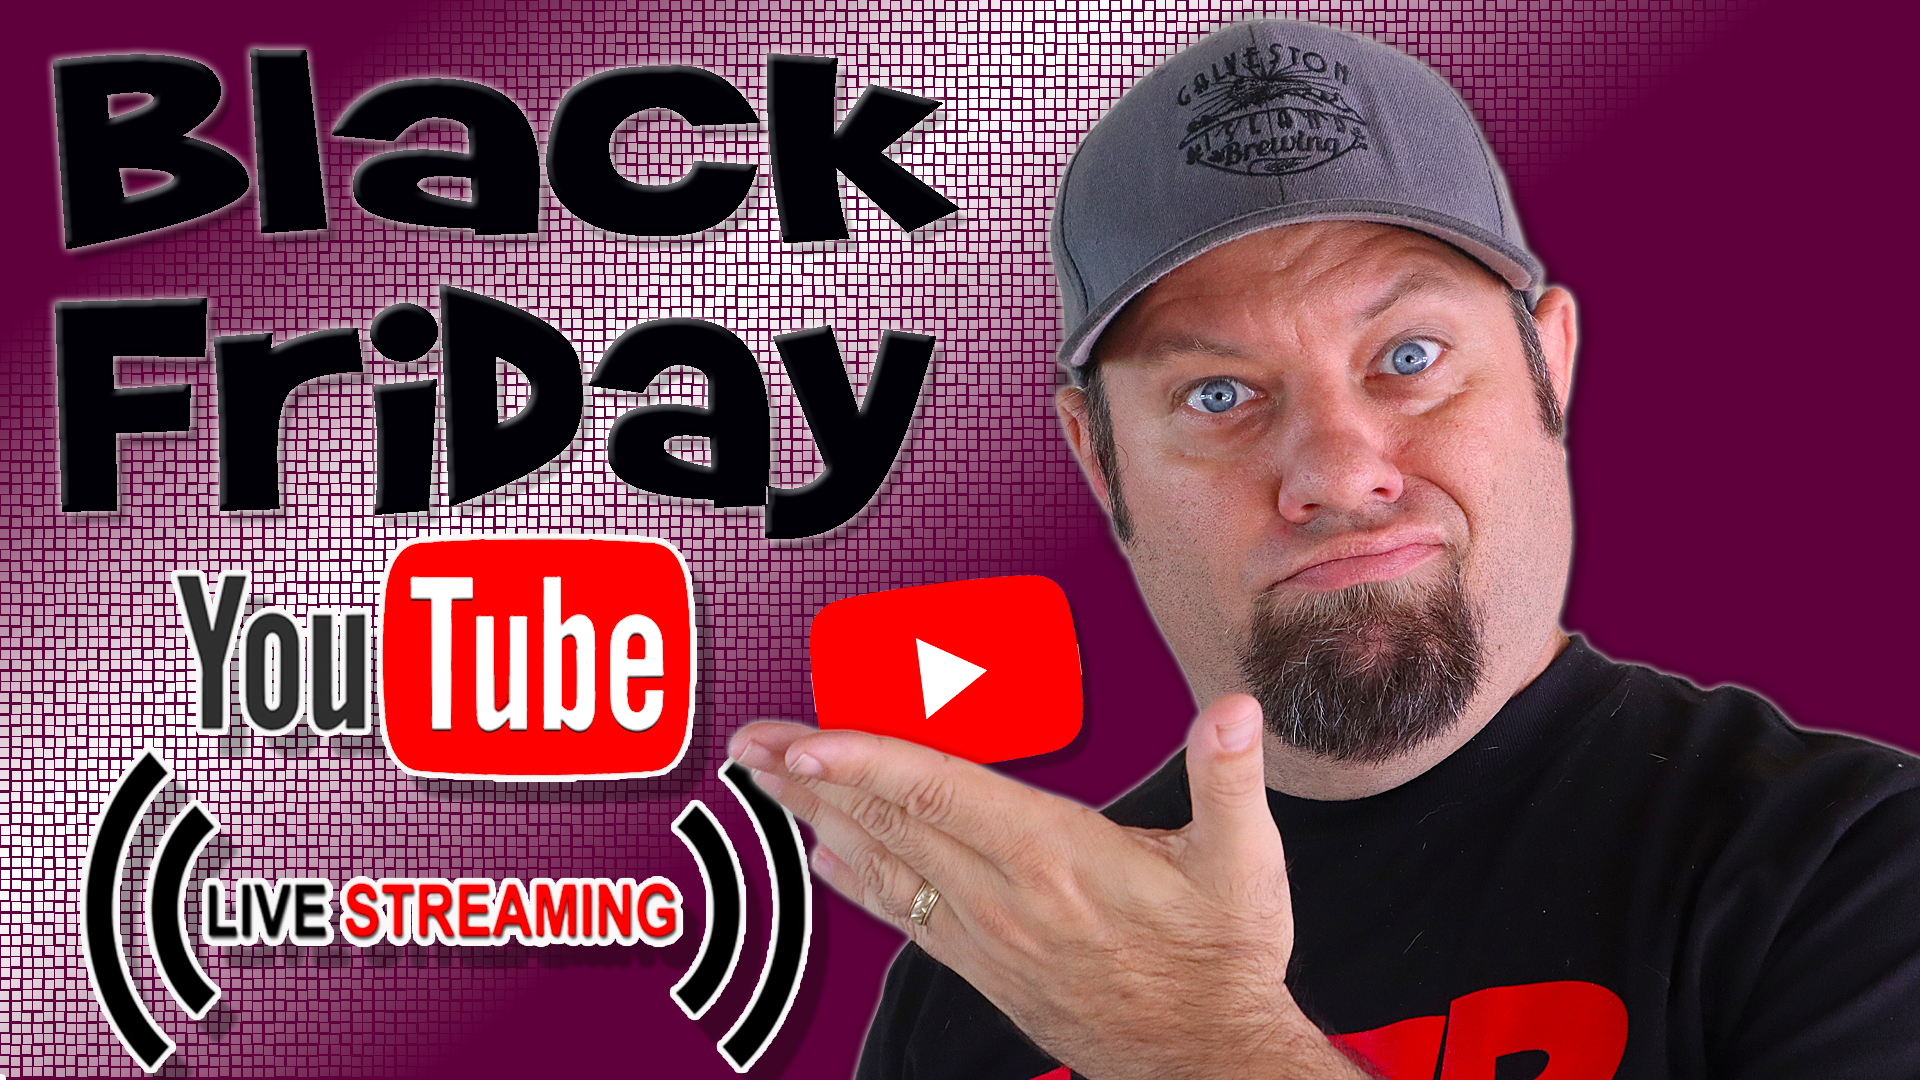 Episode 500: Lunchtime Livestream – Black Friday Deals with Guests!